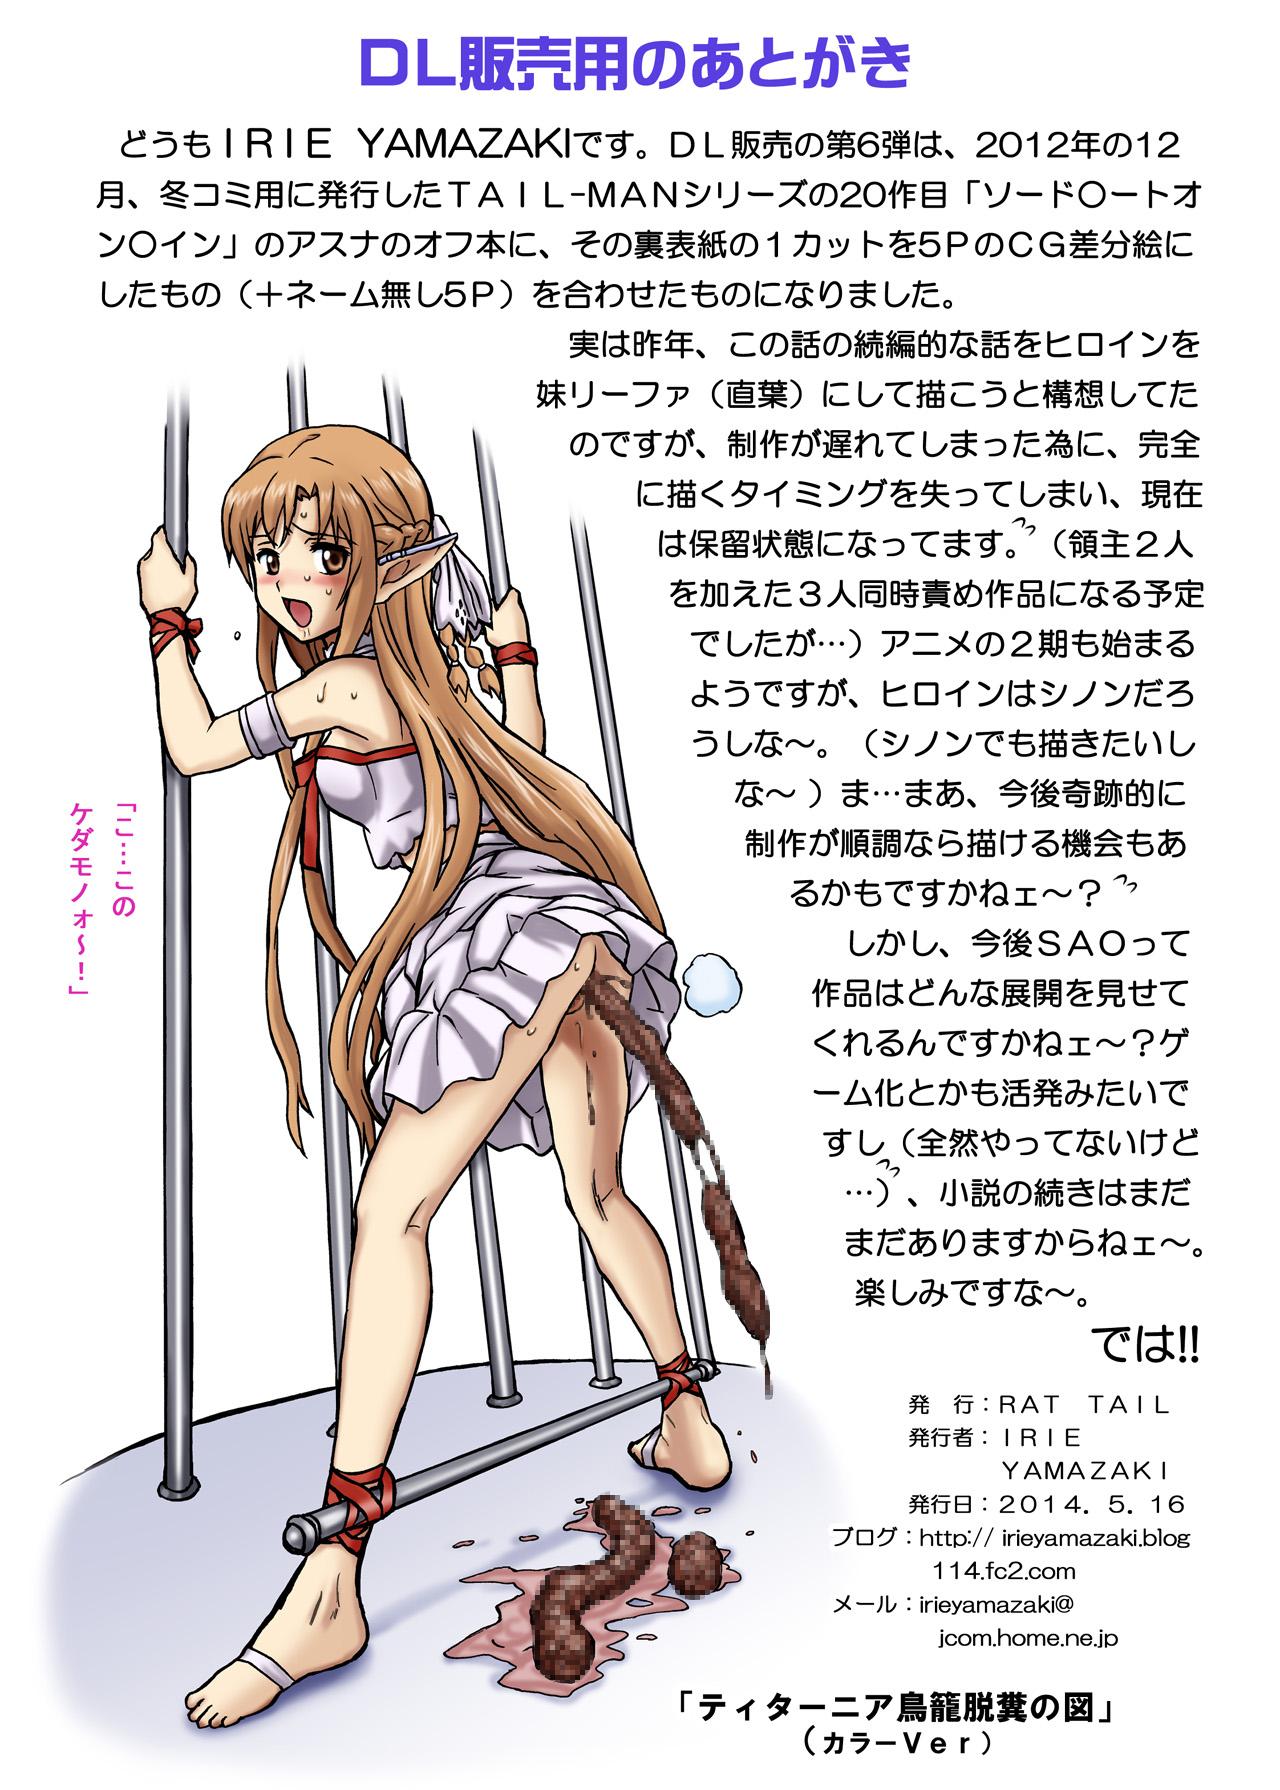 Audition TAIL-MAN ASUNA BOOK - Sword art online Shaved - Page 45